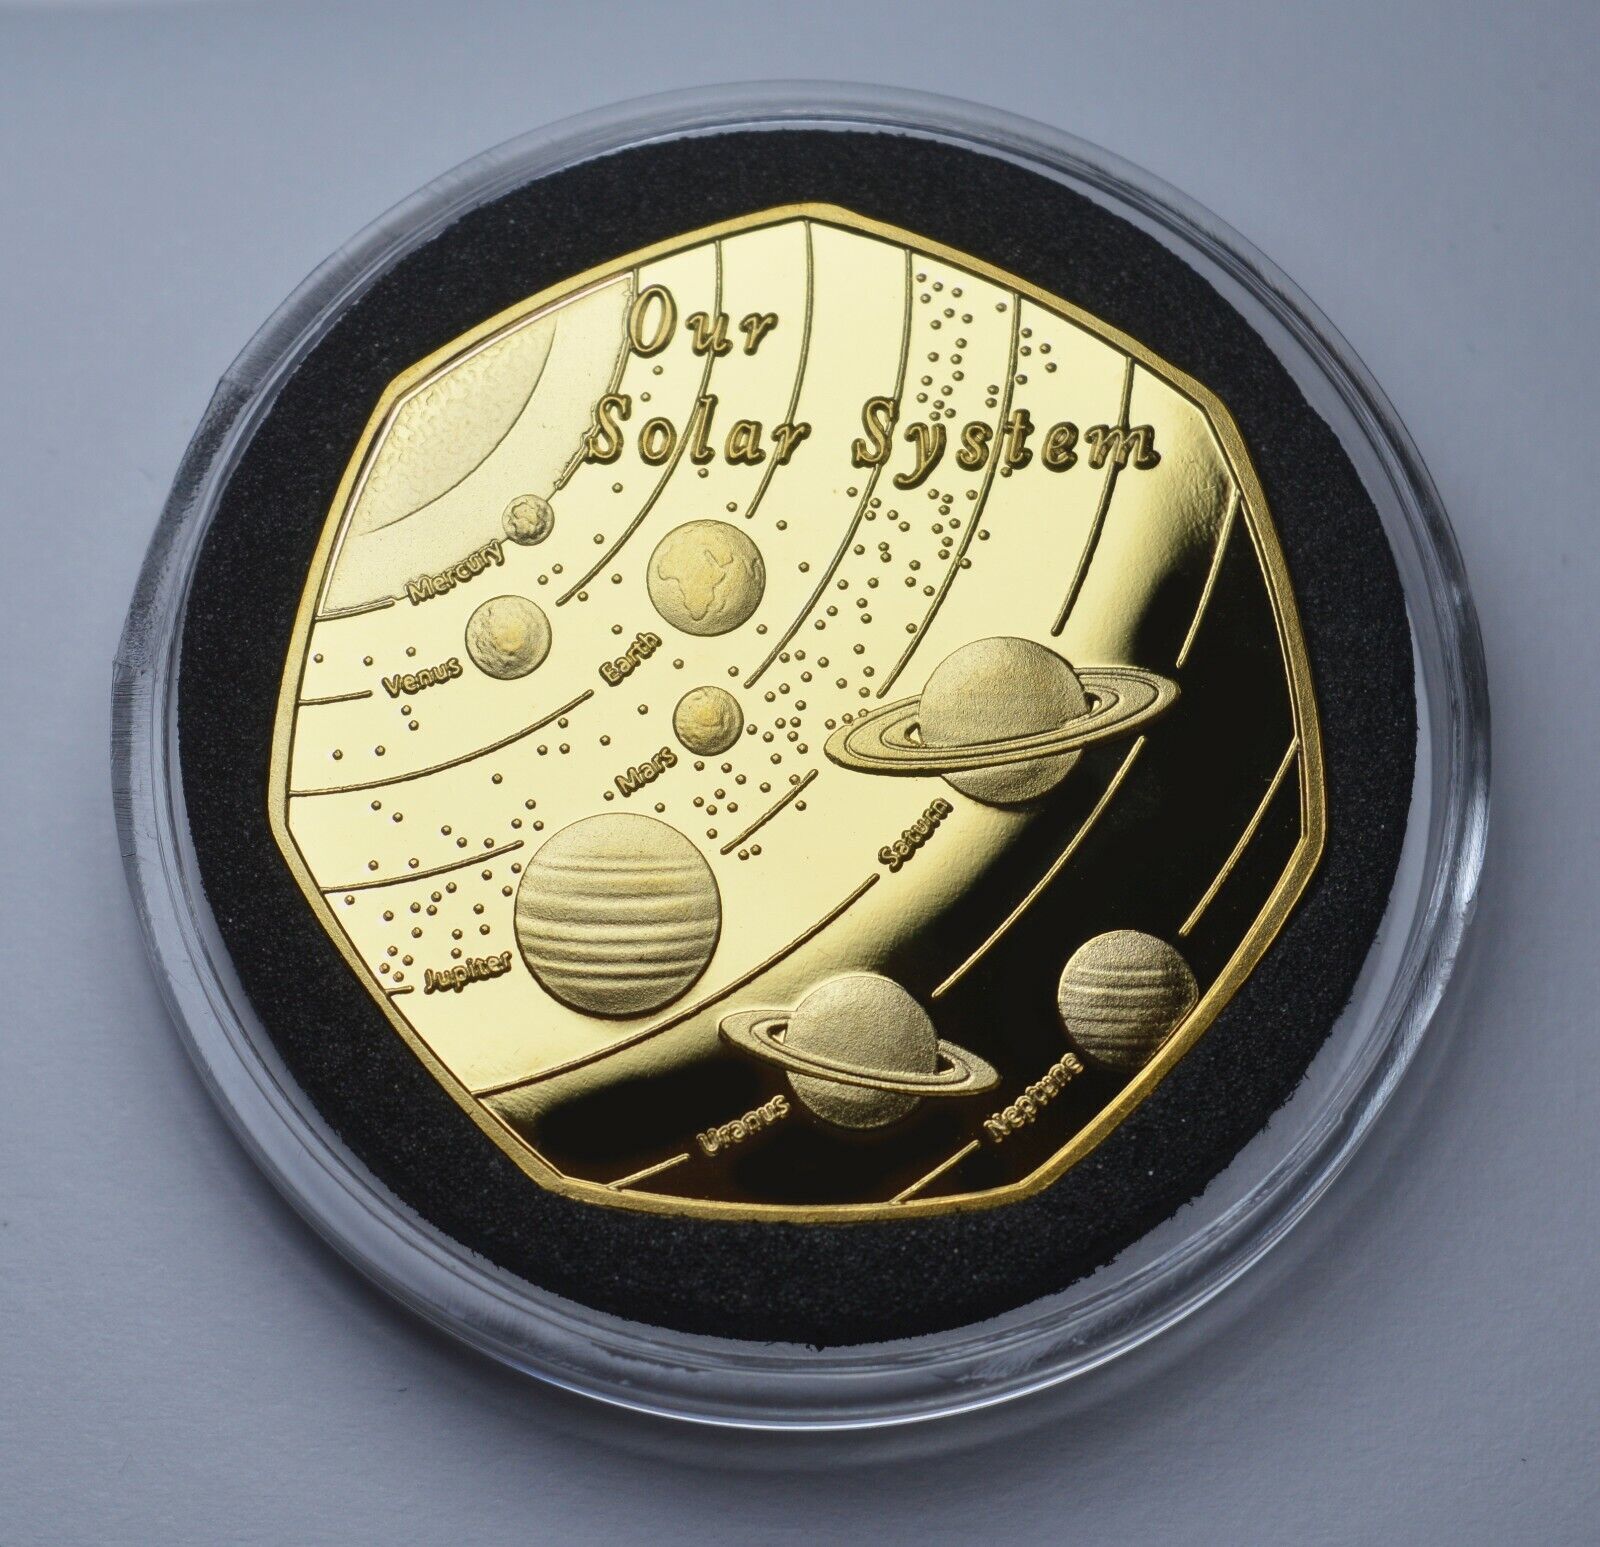 OUR SOLAR SYSTEM 24ct Gold Commemorative in Capsule Sun/Earth/Moon/Mars/Planets